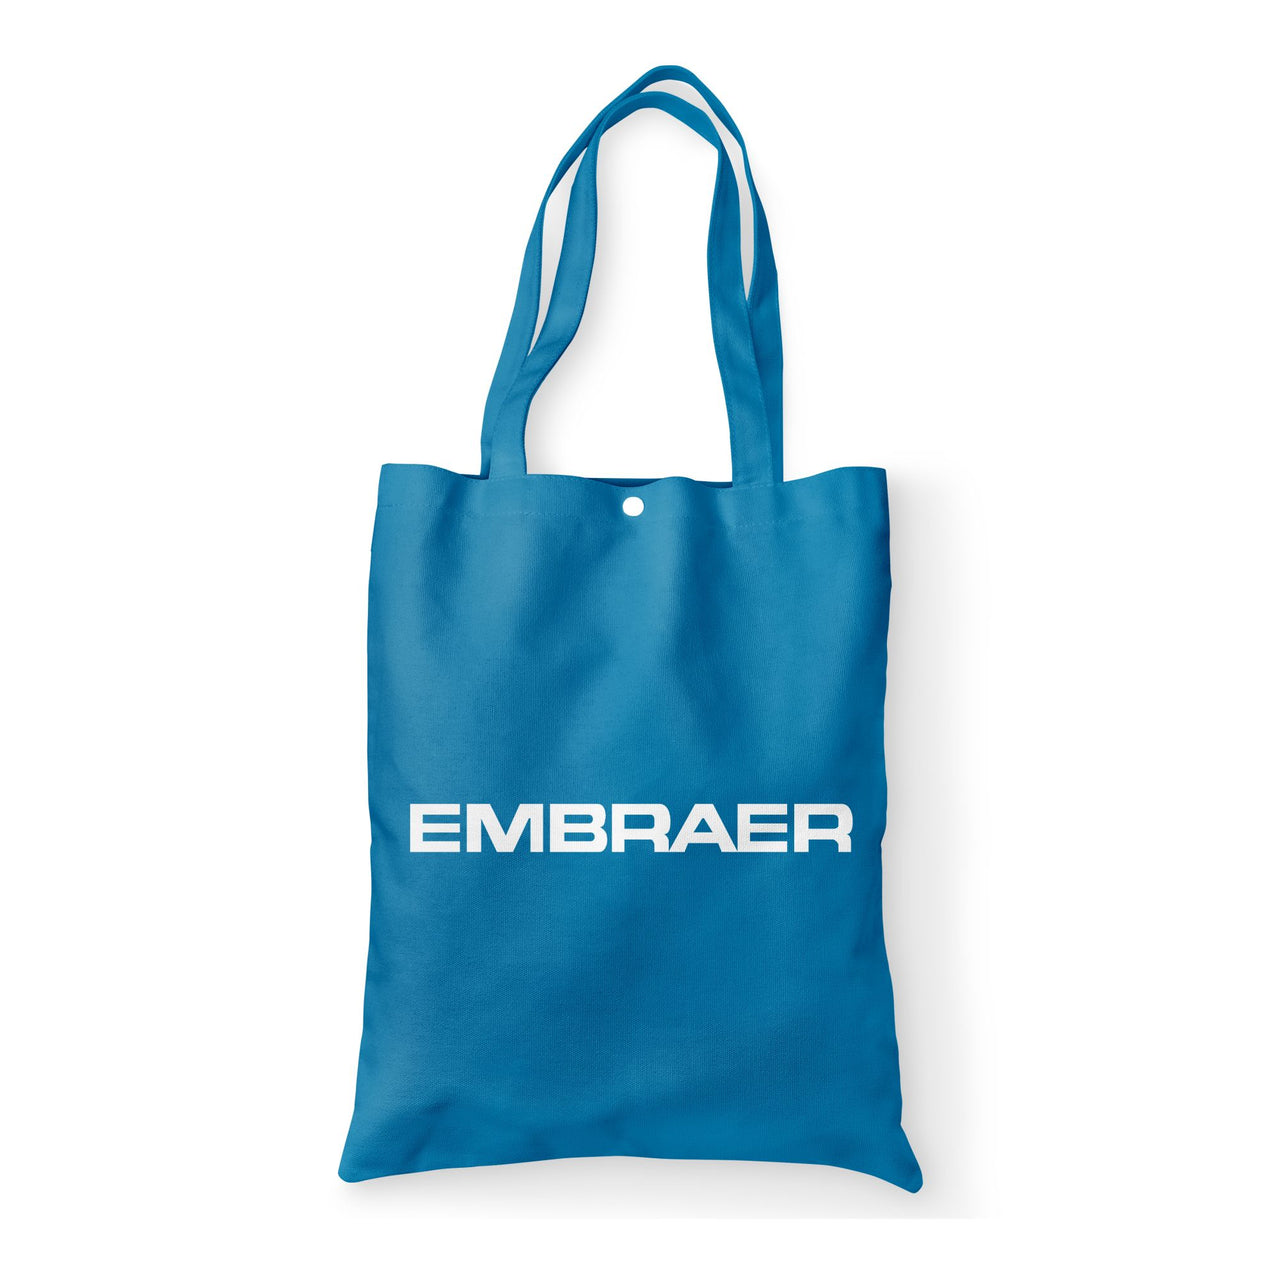 Embraer & Text Designed Tote Bags